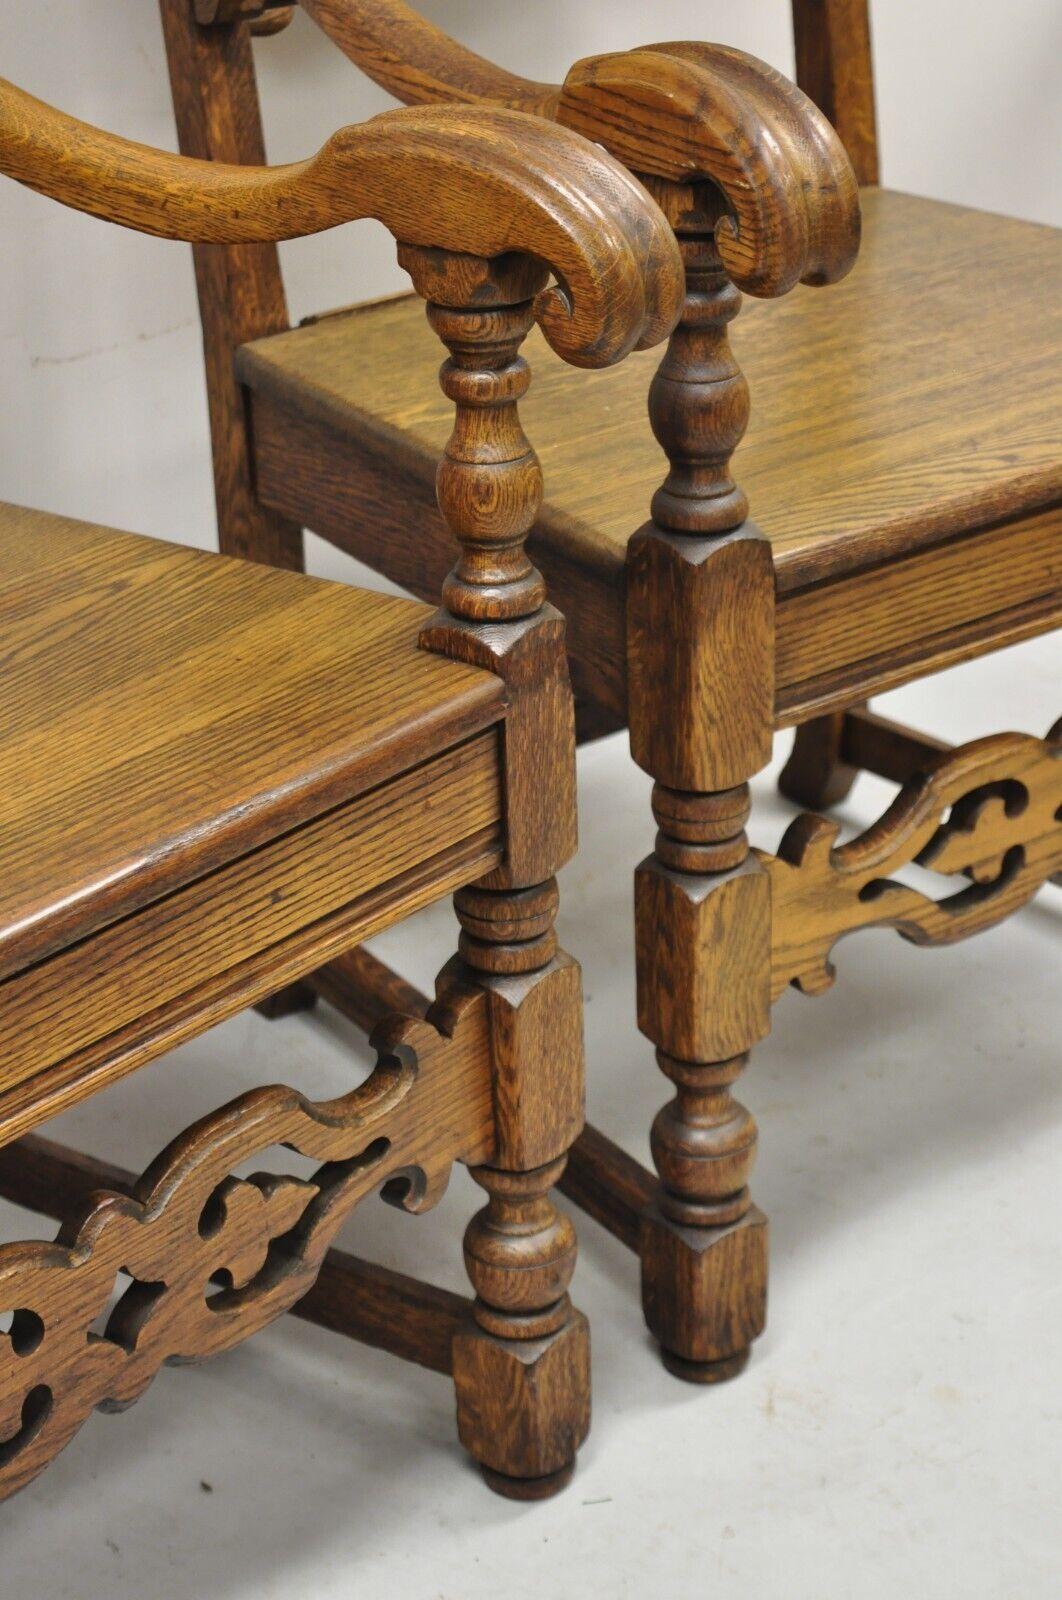 Antique Vanleigh Carved Oak Italian Renaissance Style Throne Arm Chairs - a Pair For Sale 4